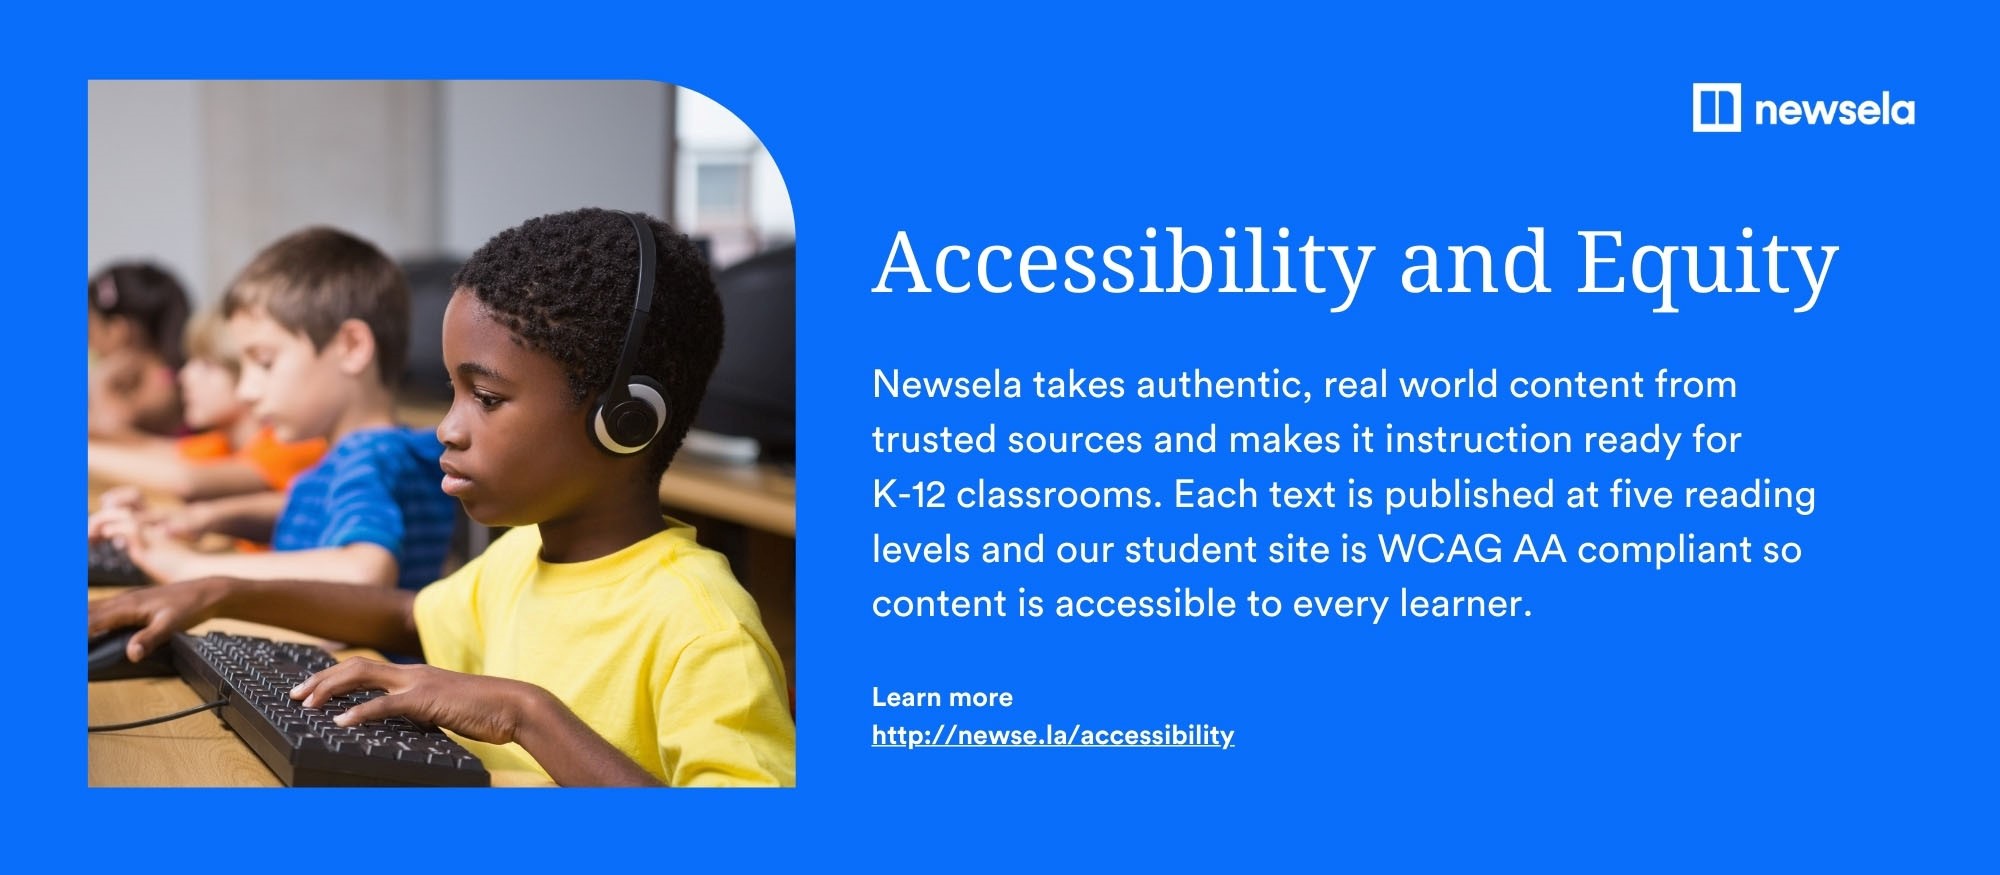 Newsela–Accessibility and Equity Newsela takes authentic, real world content from trusted sources and makes it instruction ready for K-12 classrooms. Each text is published at five reading levels and our student site is WCAG AA compliant so content is accessible to every learner. Learn more at http://newse.la/accessibility.